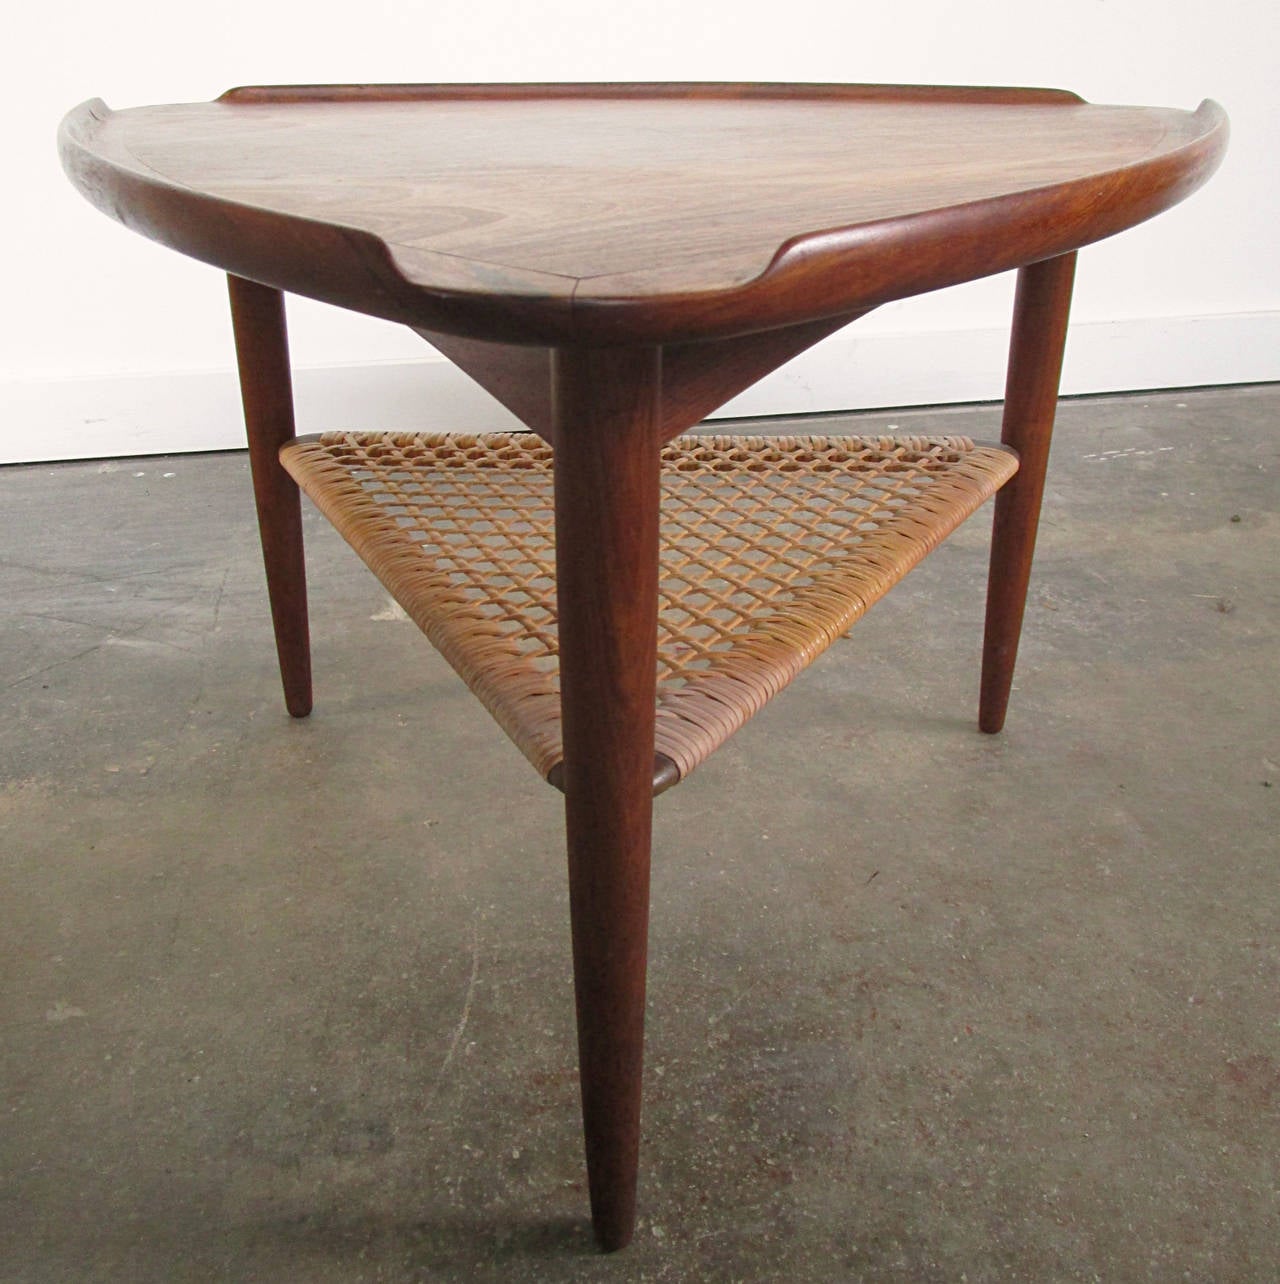 Guitar pick form, triangular table with medial cane shelf. Wonderfully grained rosewood top with raised edge detail. Danish export 1960s. warm patina, shows use.